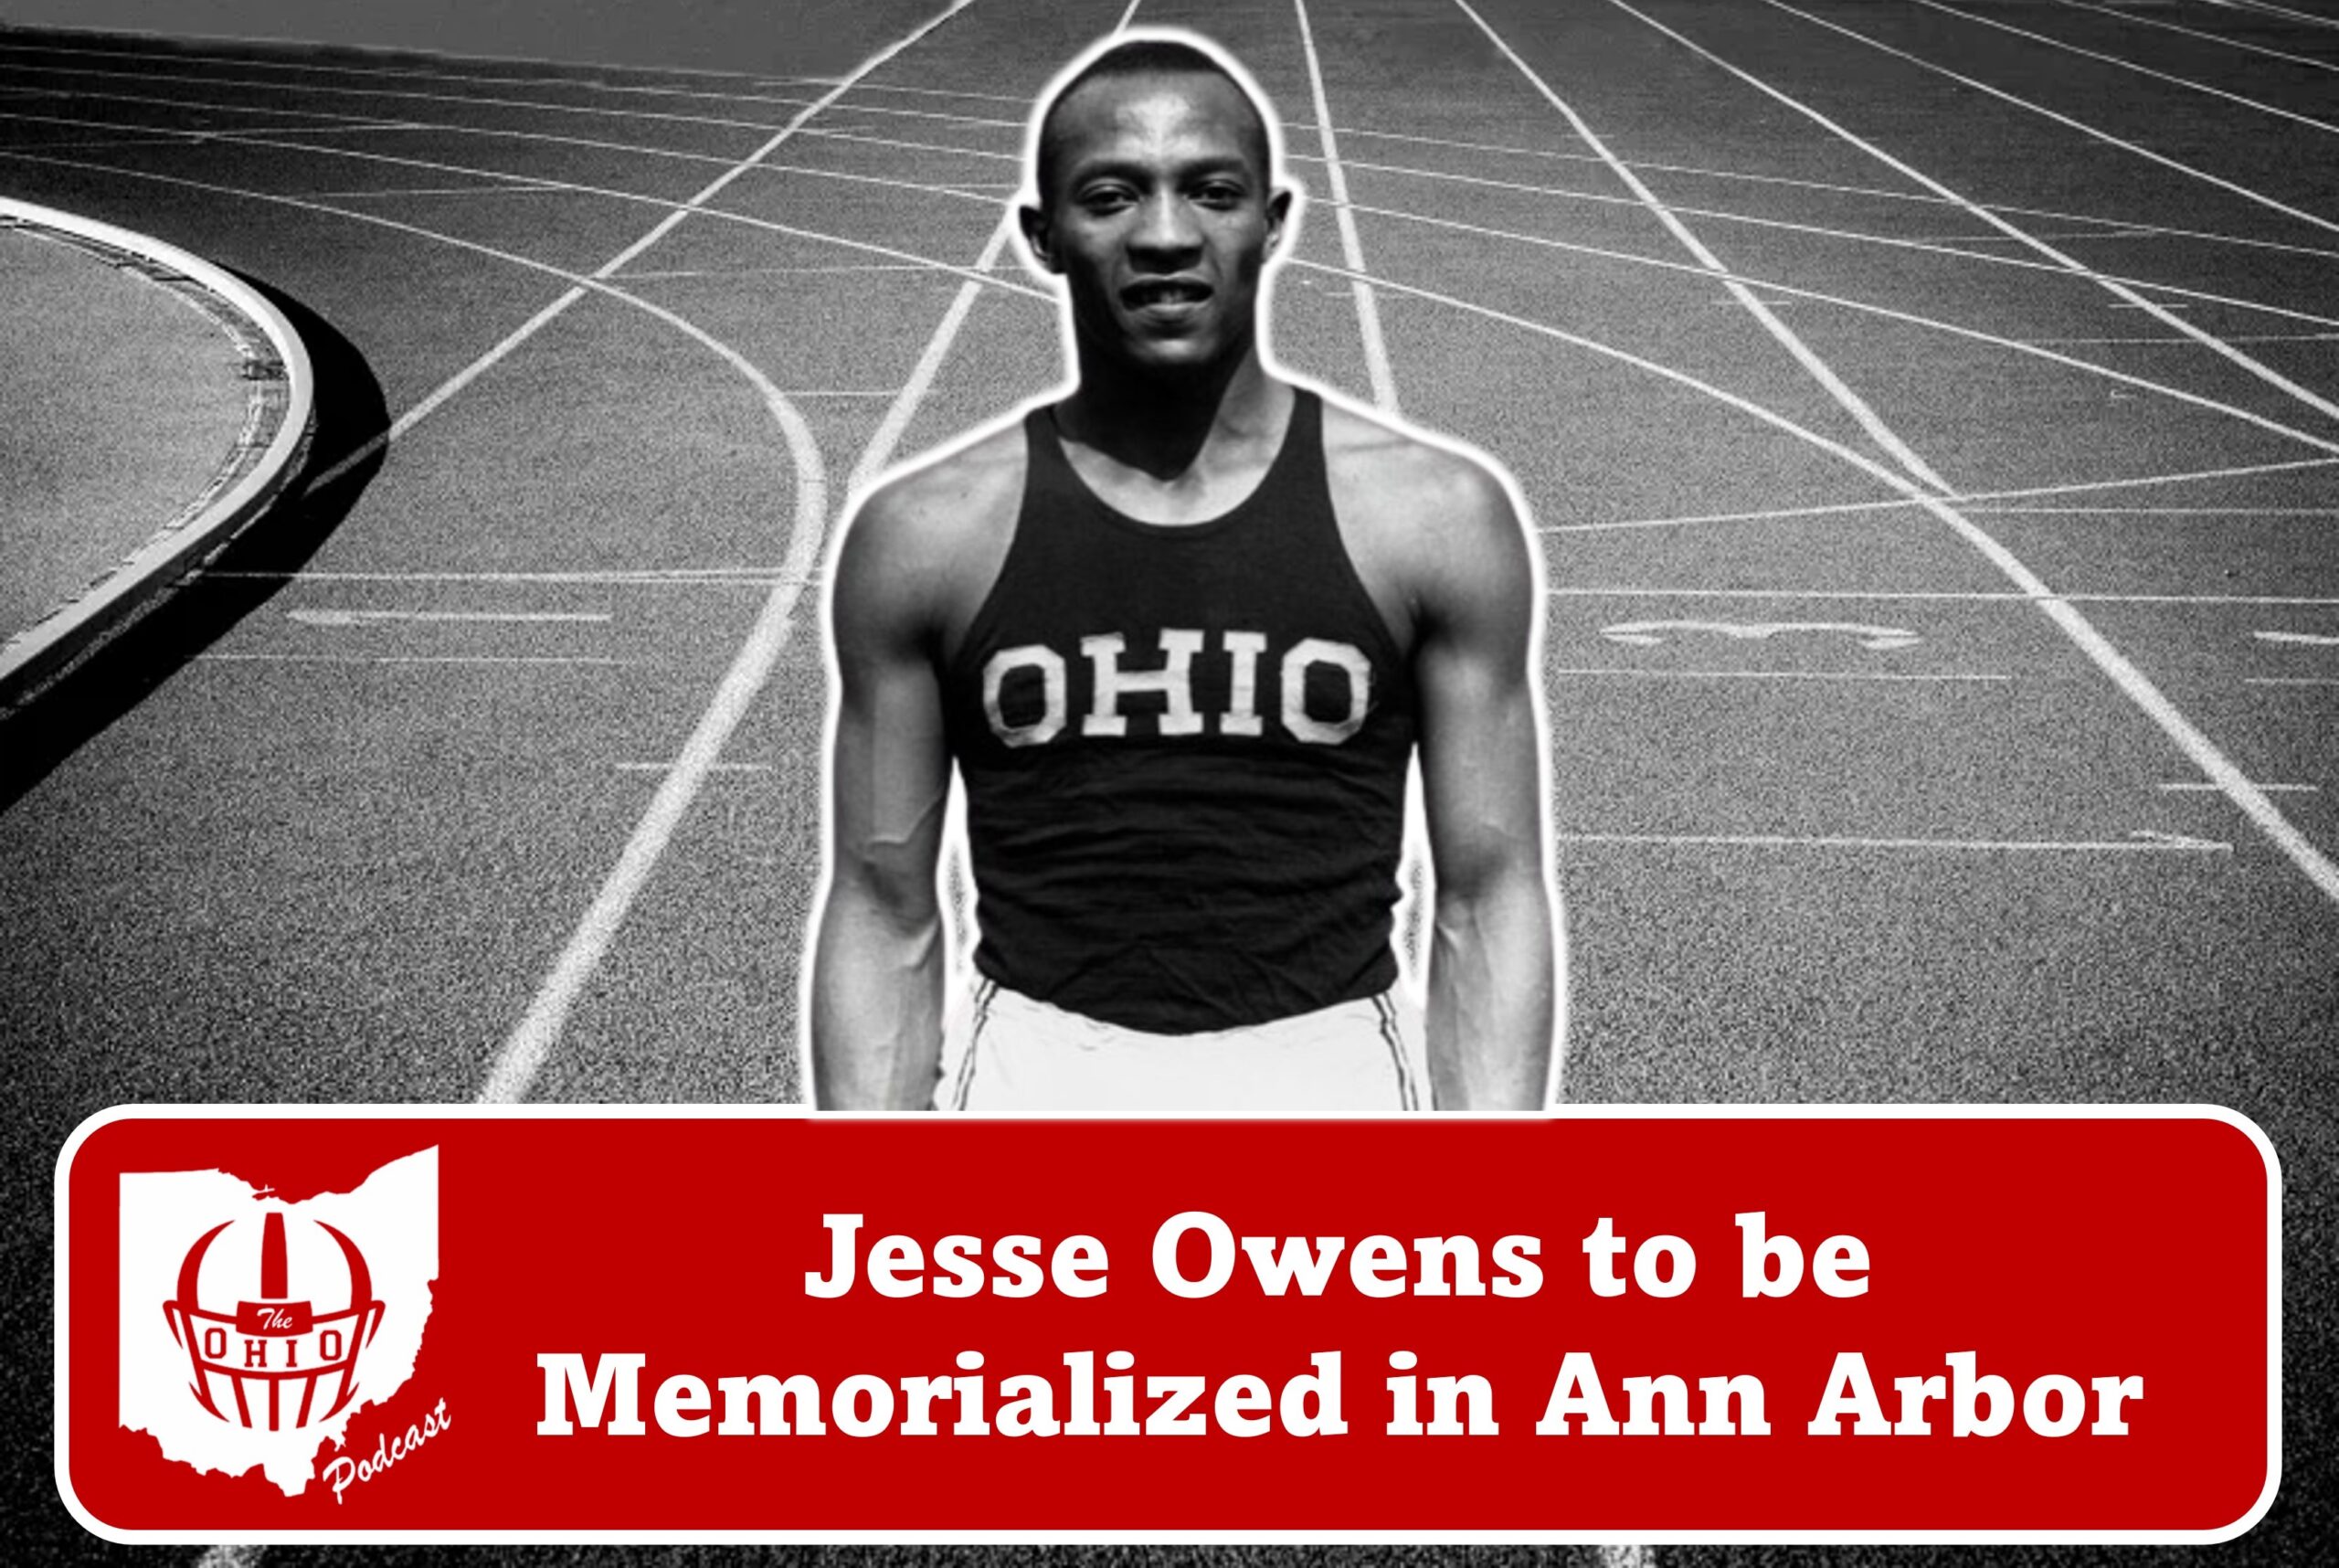 Jesse Owens to be Honored